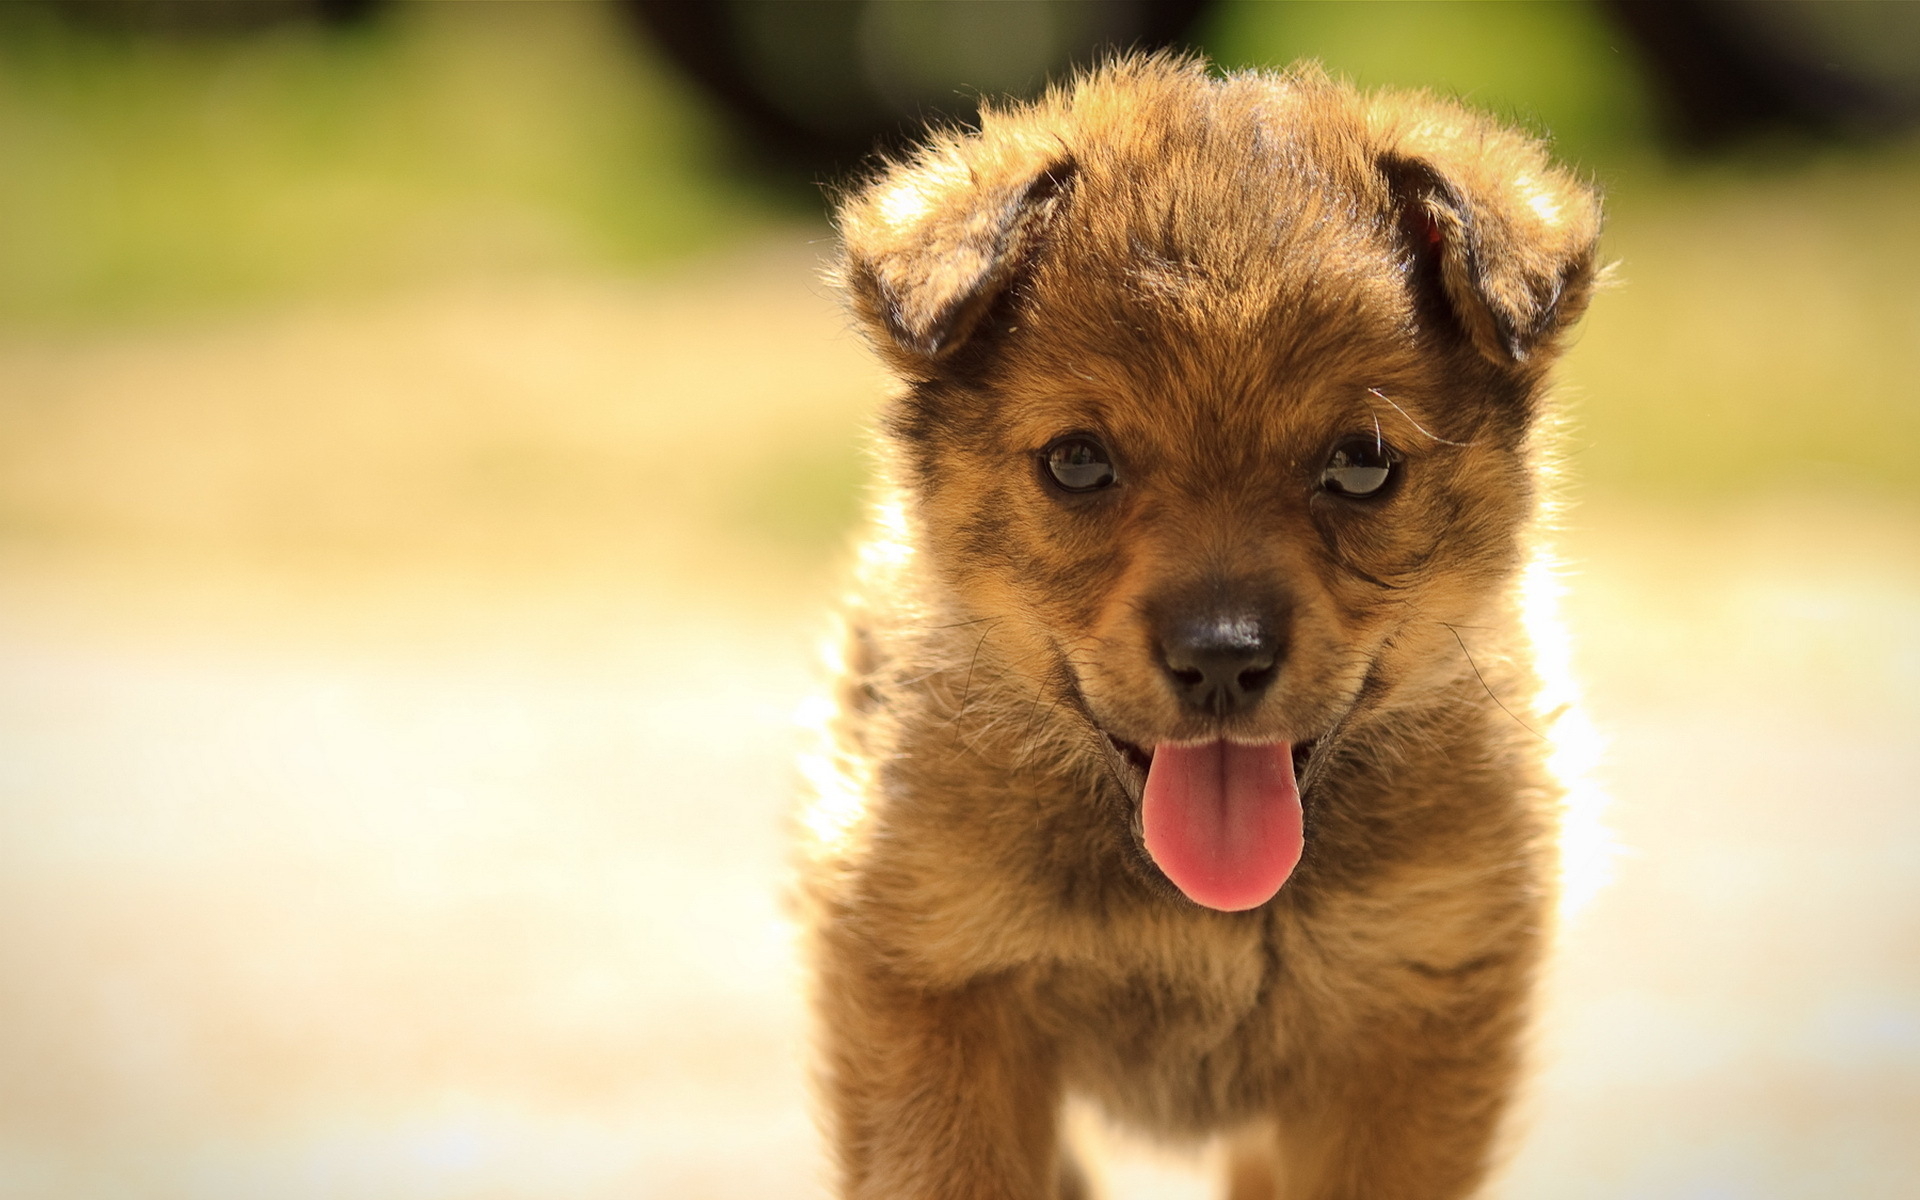 Little puppy wallpapers and images - wallpapers, pictures, photos